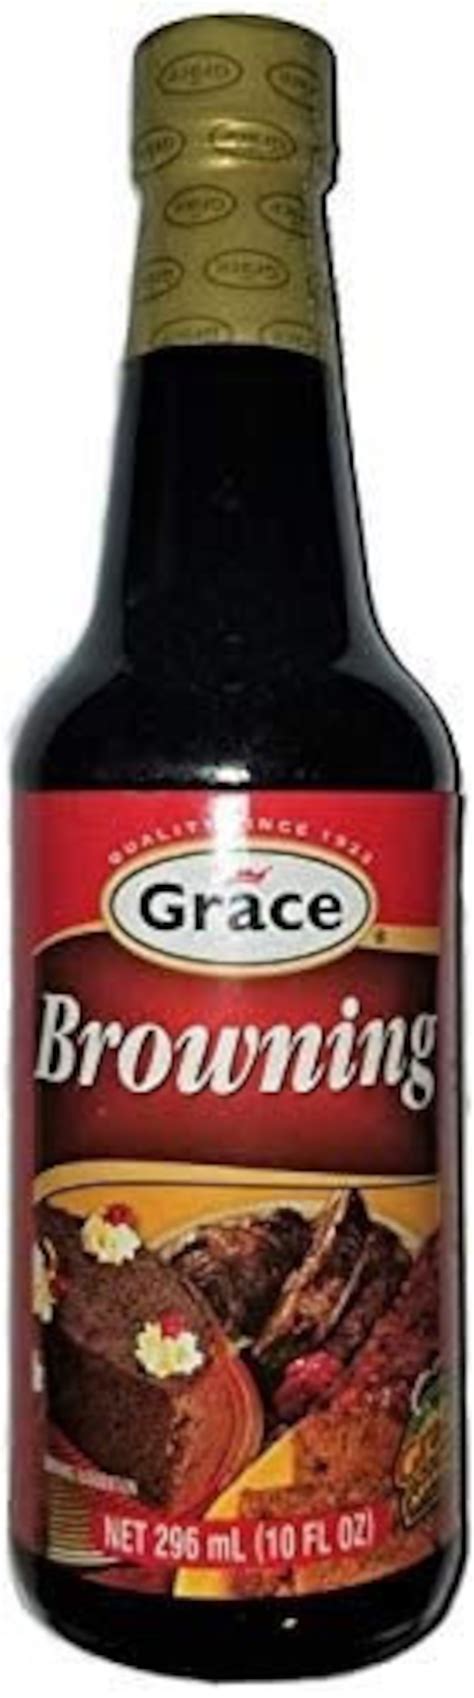 100 Authentic Grace Jamaican Browning 10 Fl Oz 2 Bottles Etsy